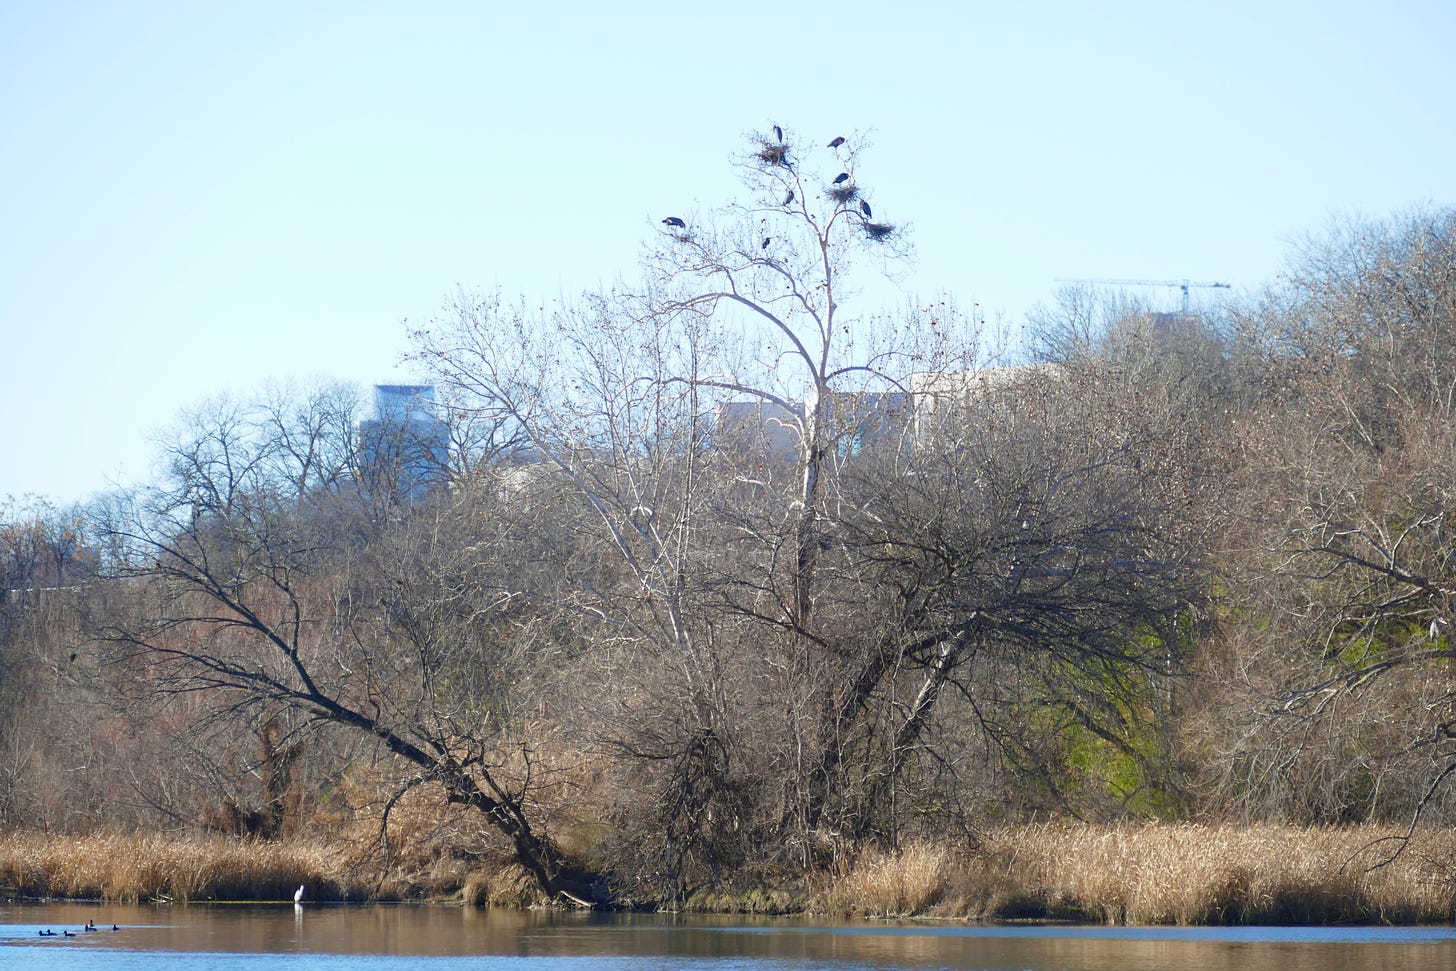 Color photo of herons nested in a tall bare tree at the edge of the river, skyscrapers visible in the background